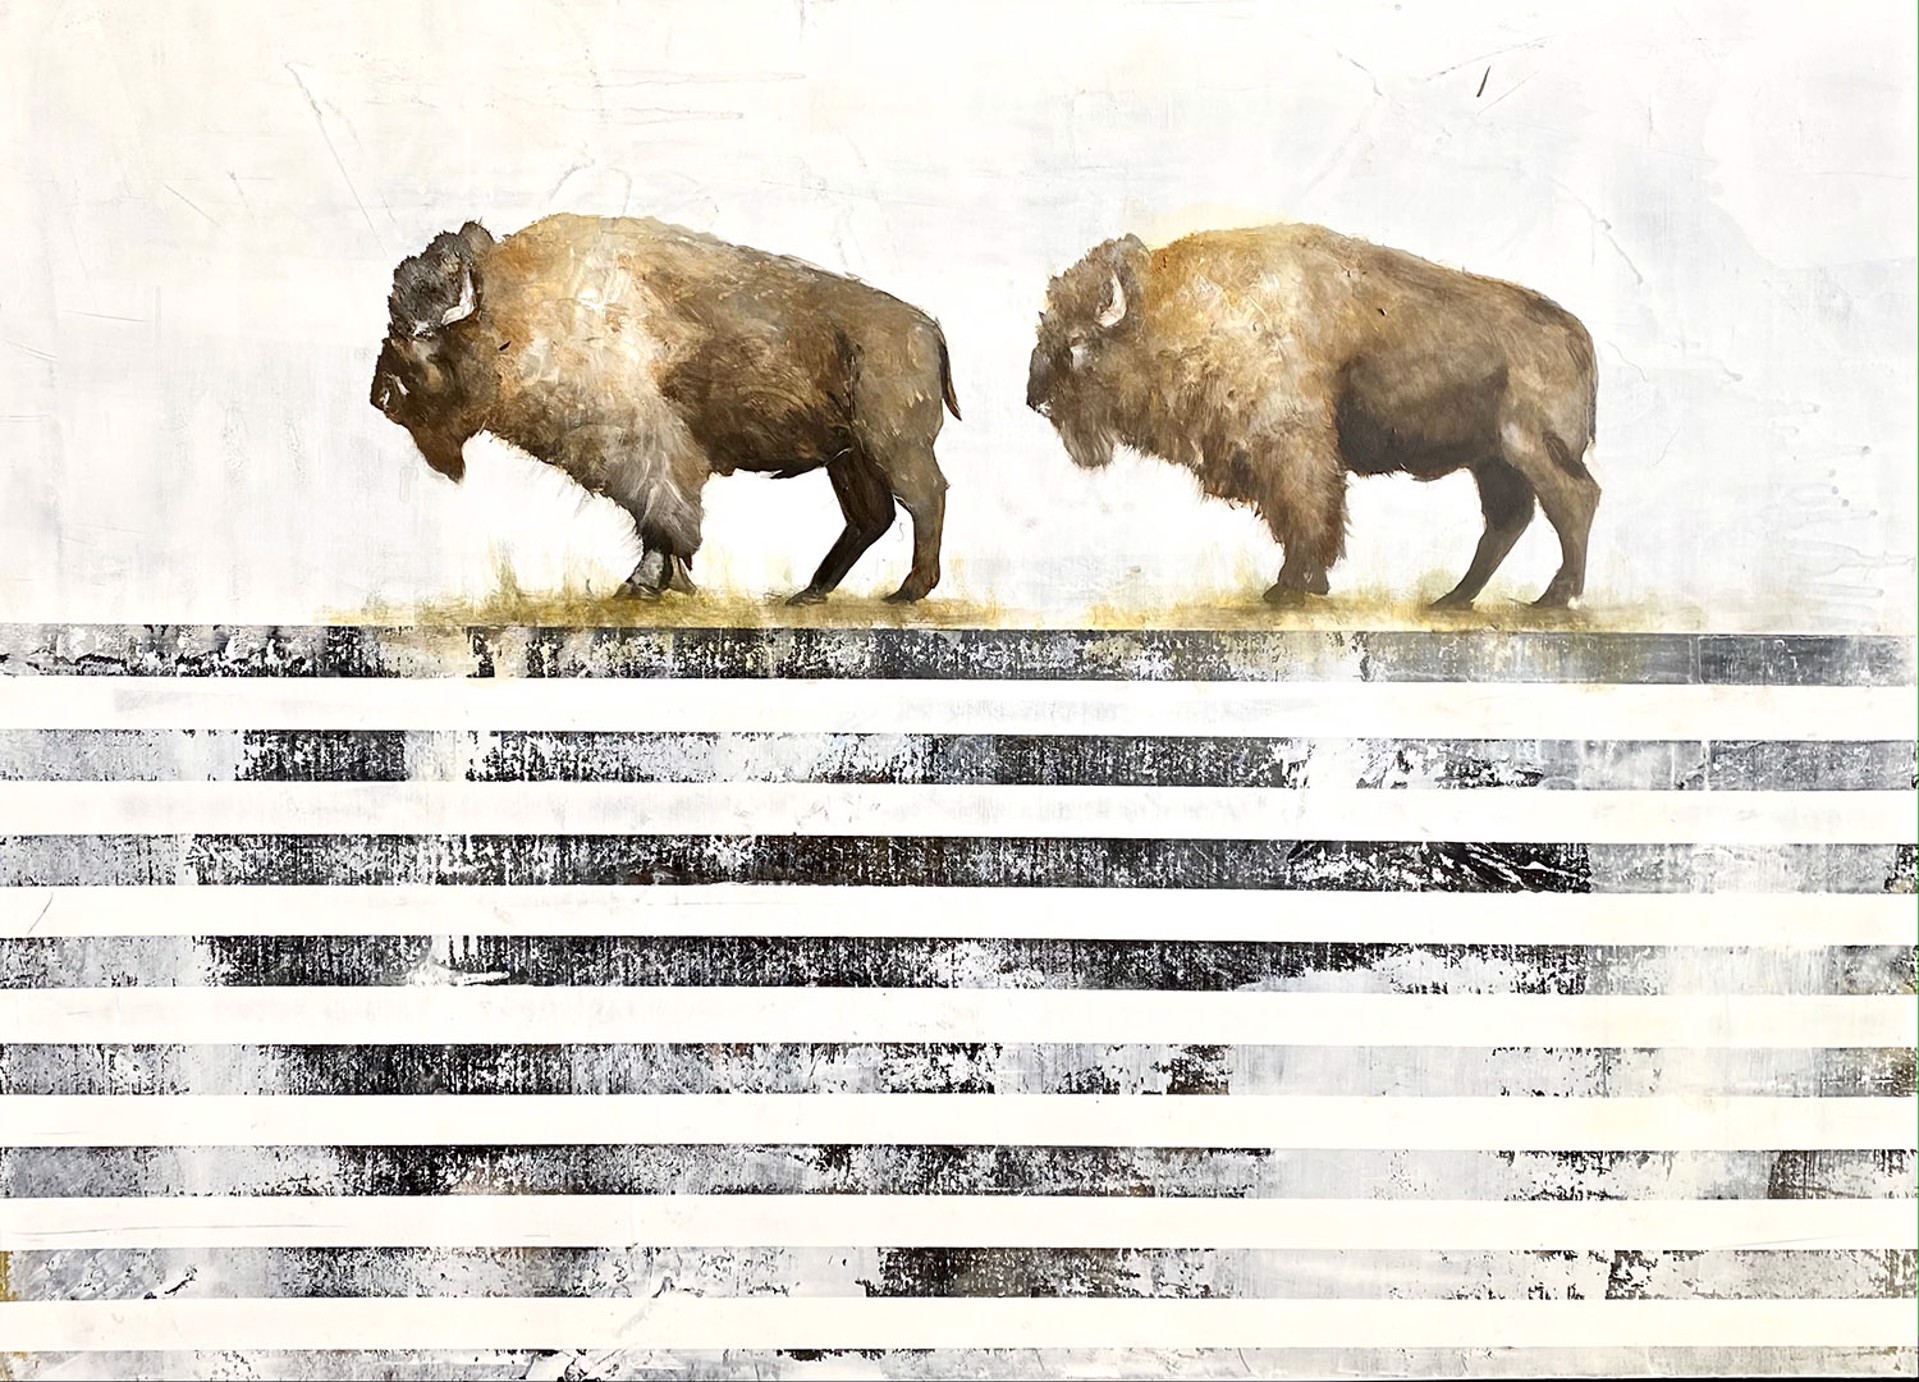 A Contemporary Painting Of Two Bison Standing On A Black And White Striped Background By Jenna Von Benedikt At Gallery Wild